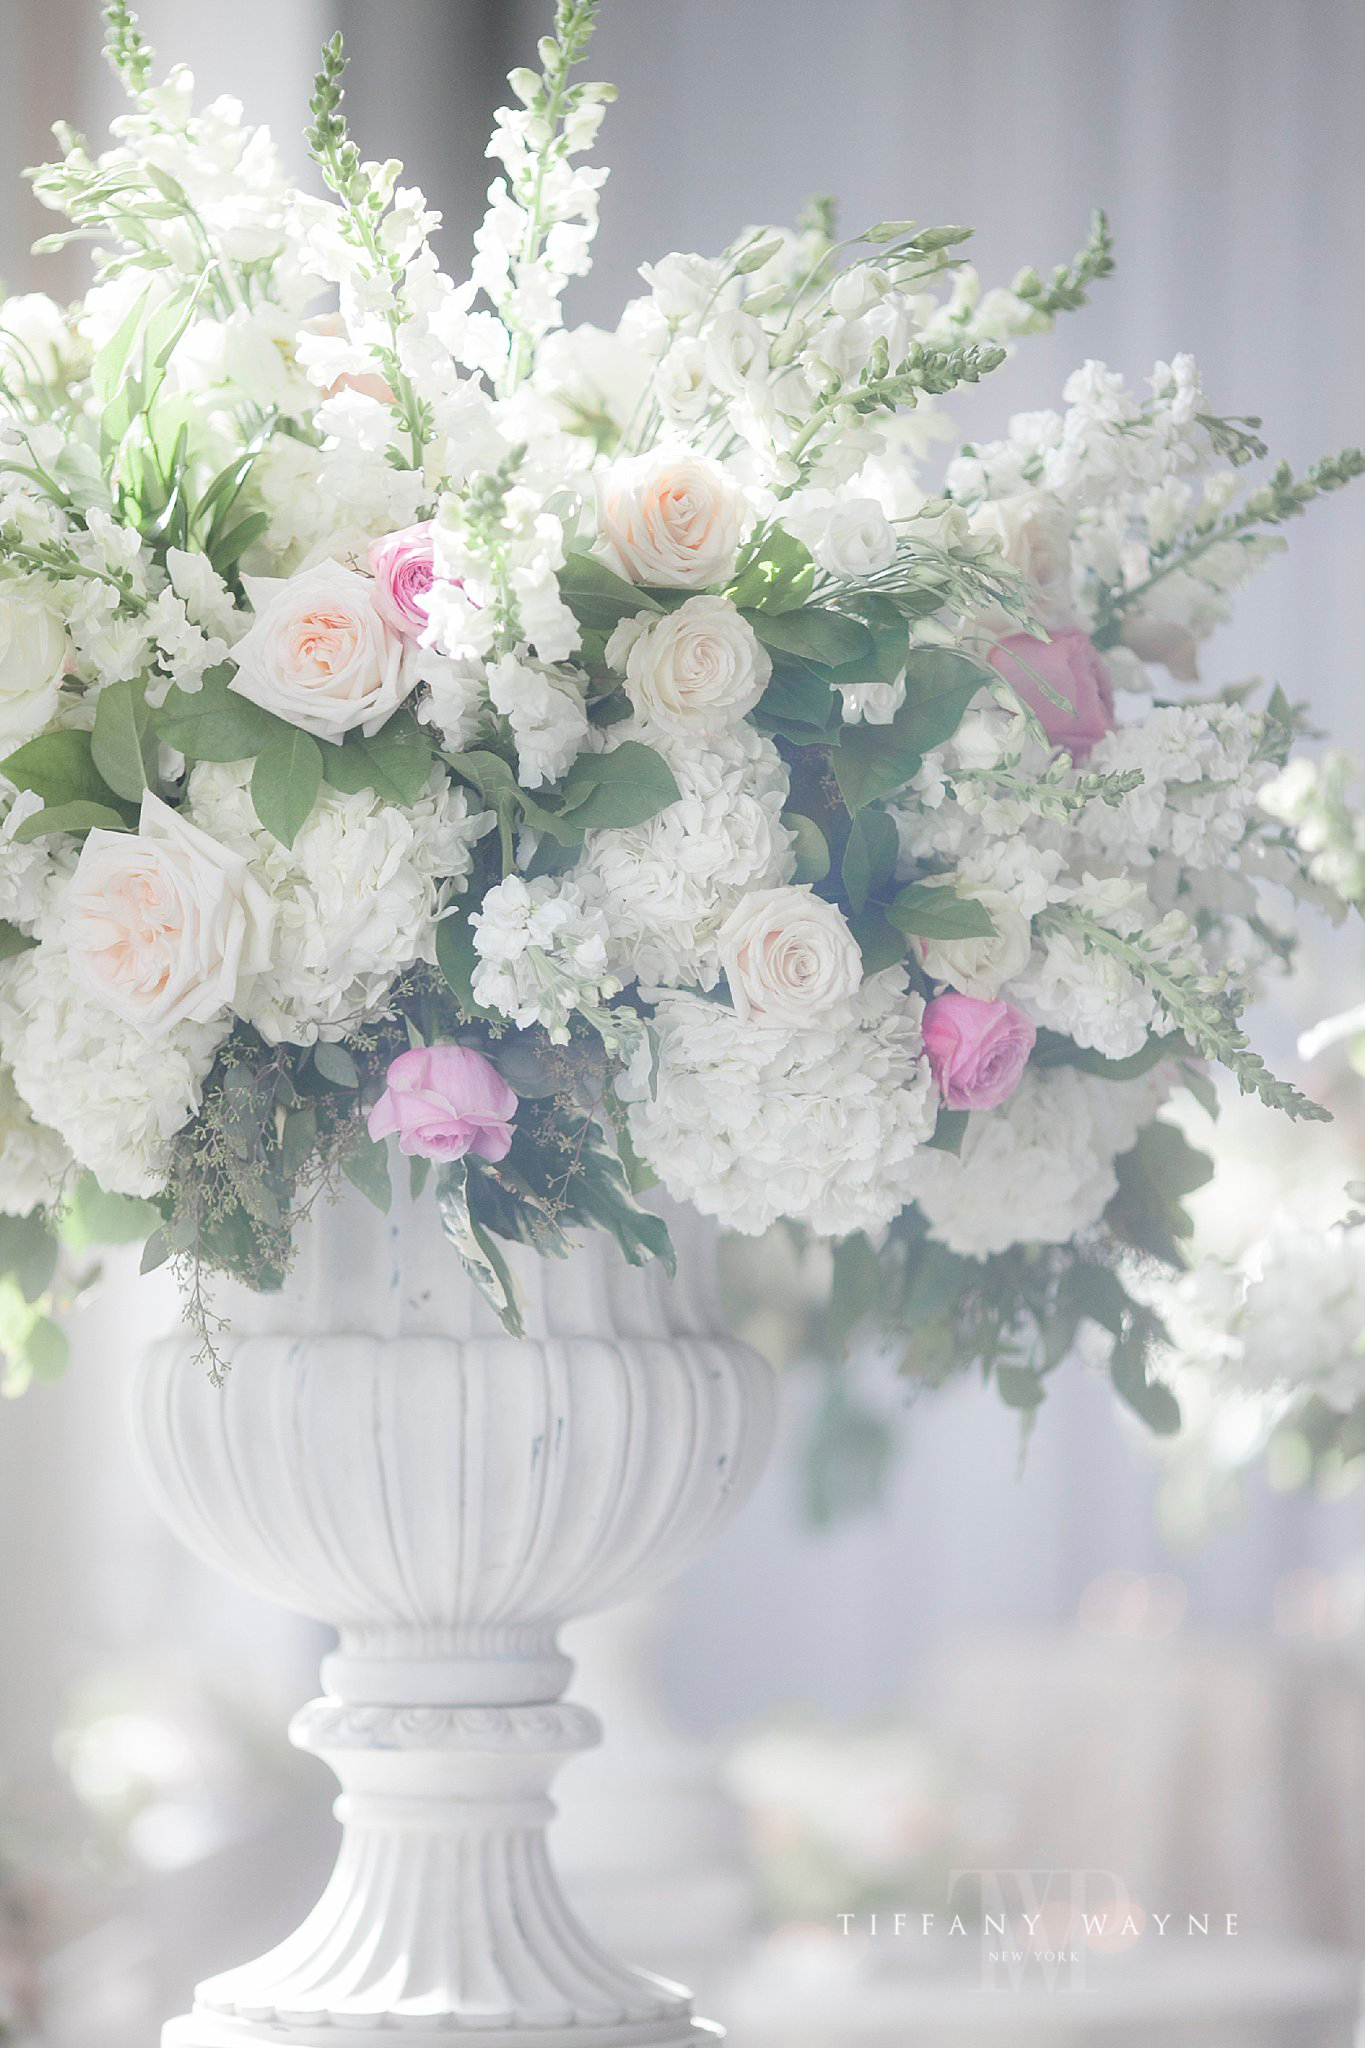 Ivory and blush floral arrangements for NY wedding day with Tiffany Wayne Photography